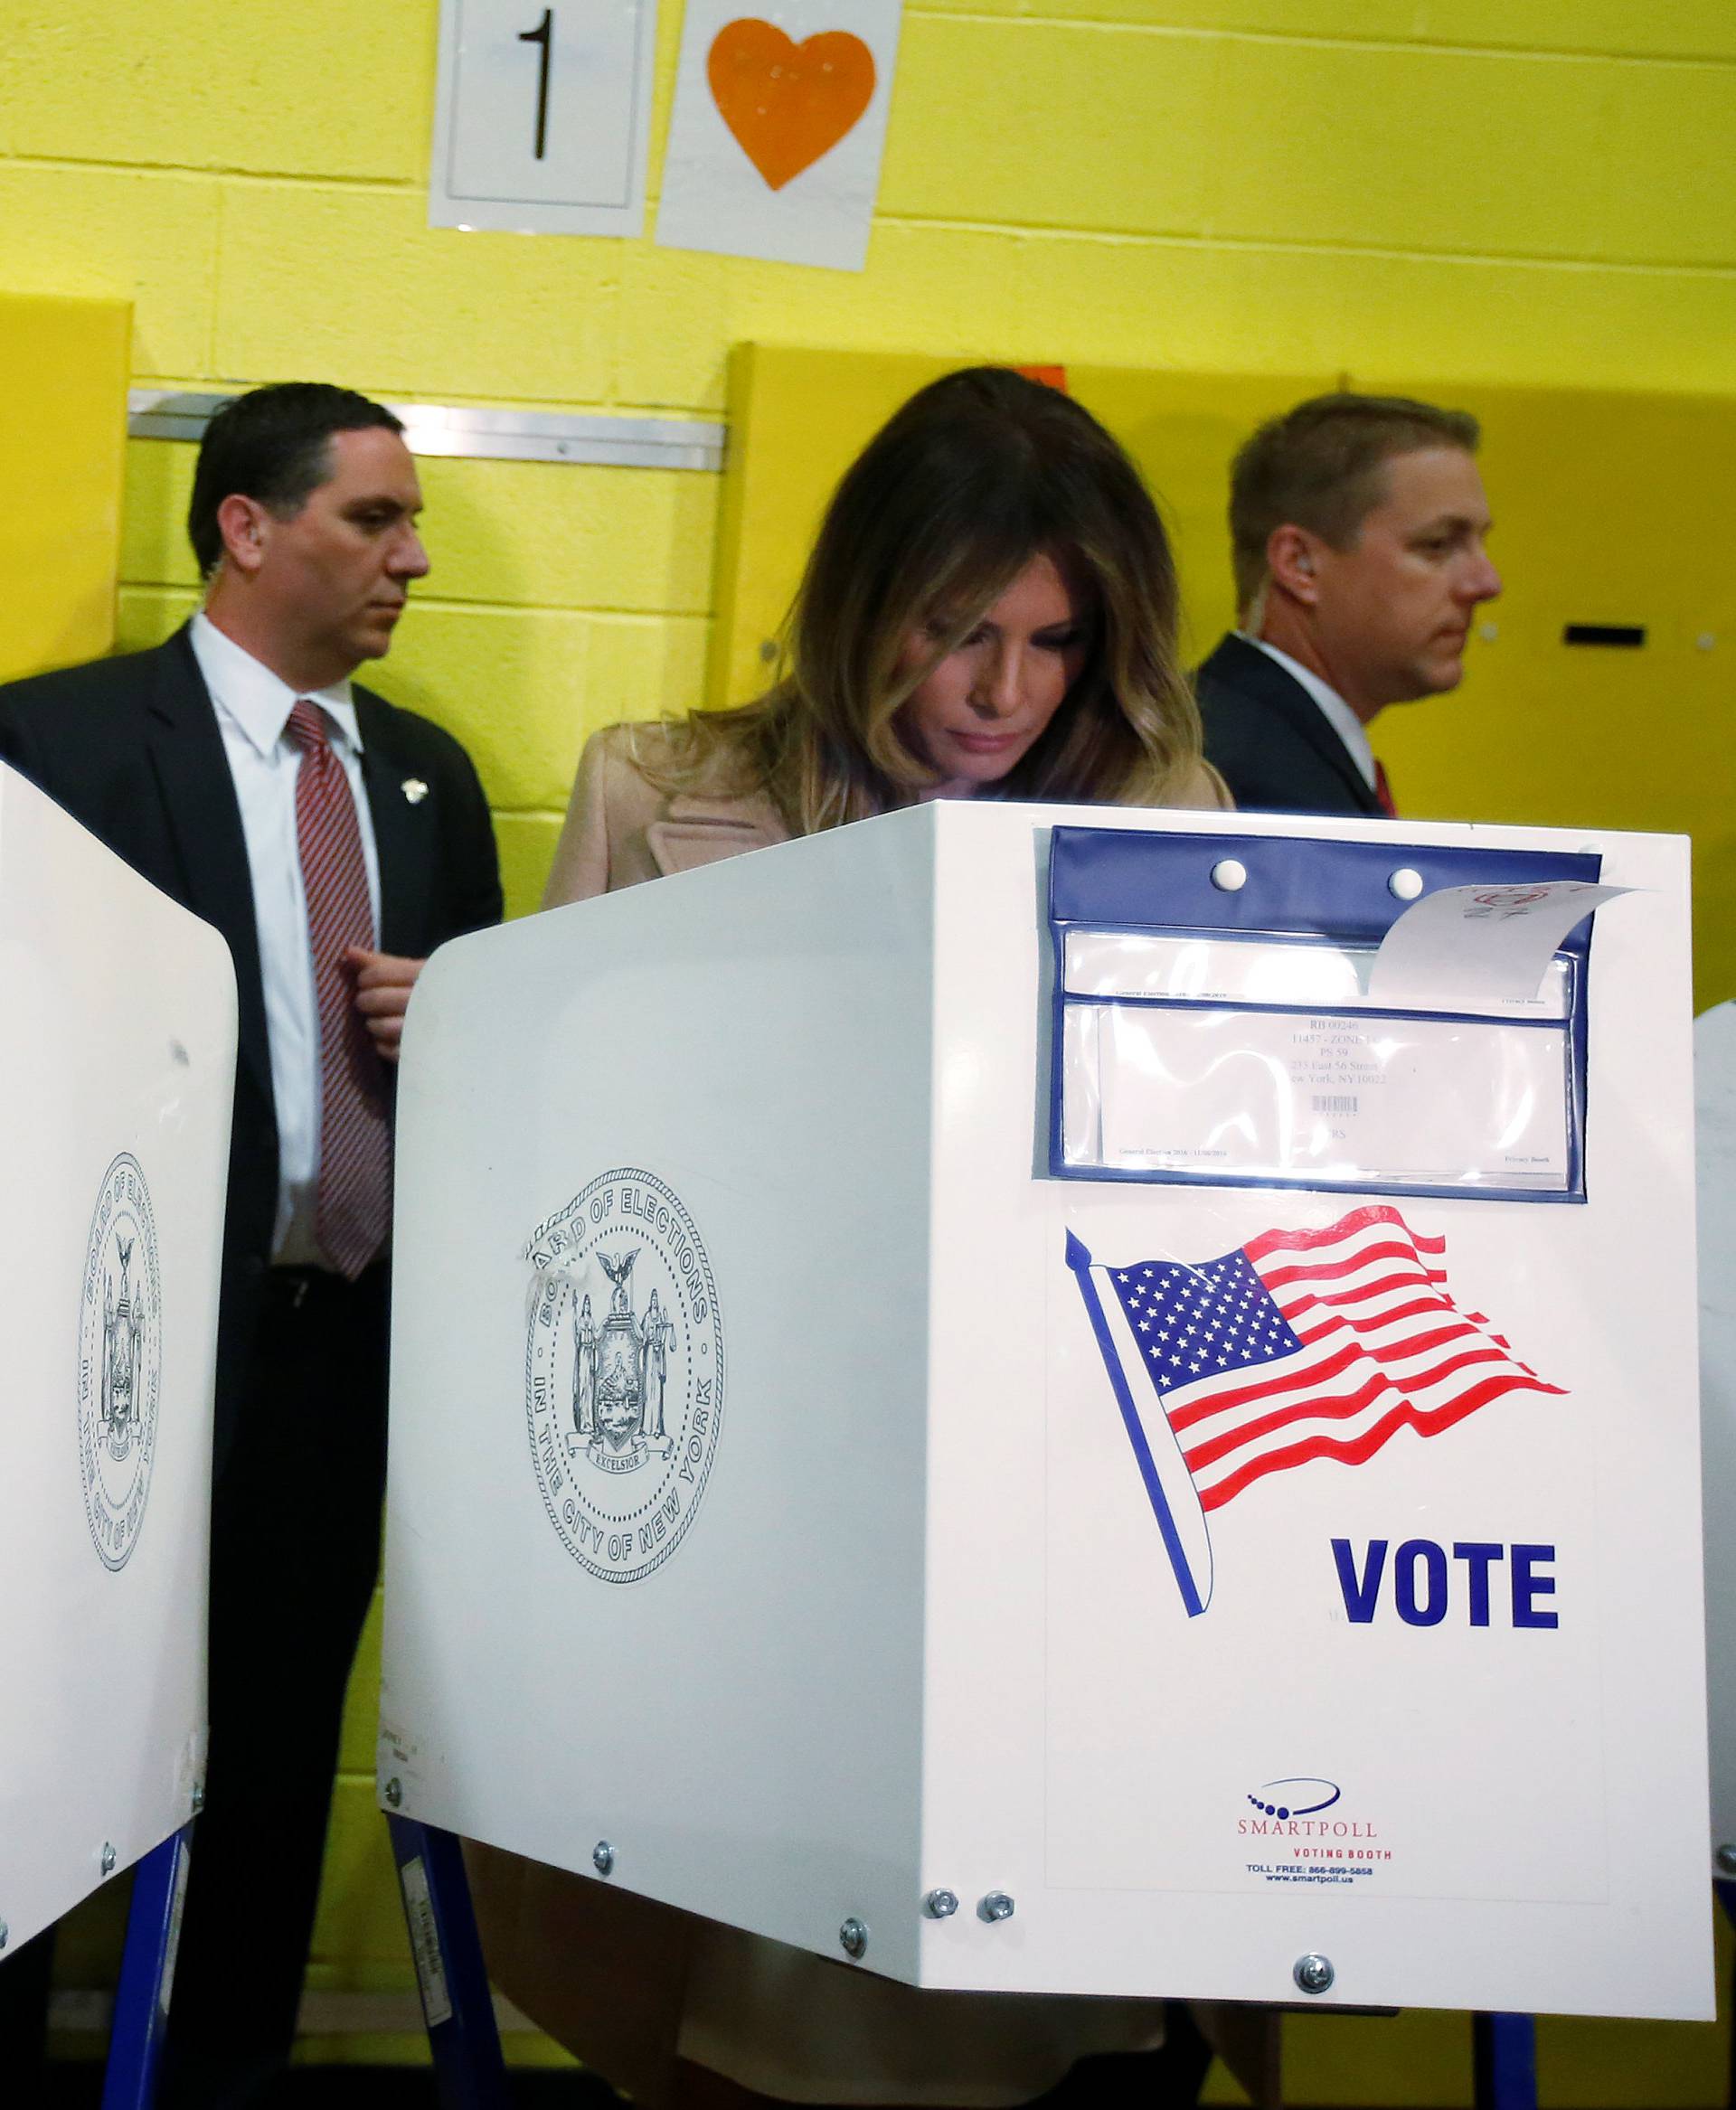 Republican presidential nominee Donald Trump and his wife Melania Trump vote at PS 59 in New York